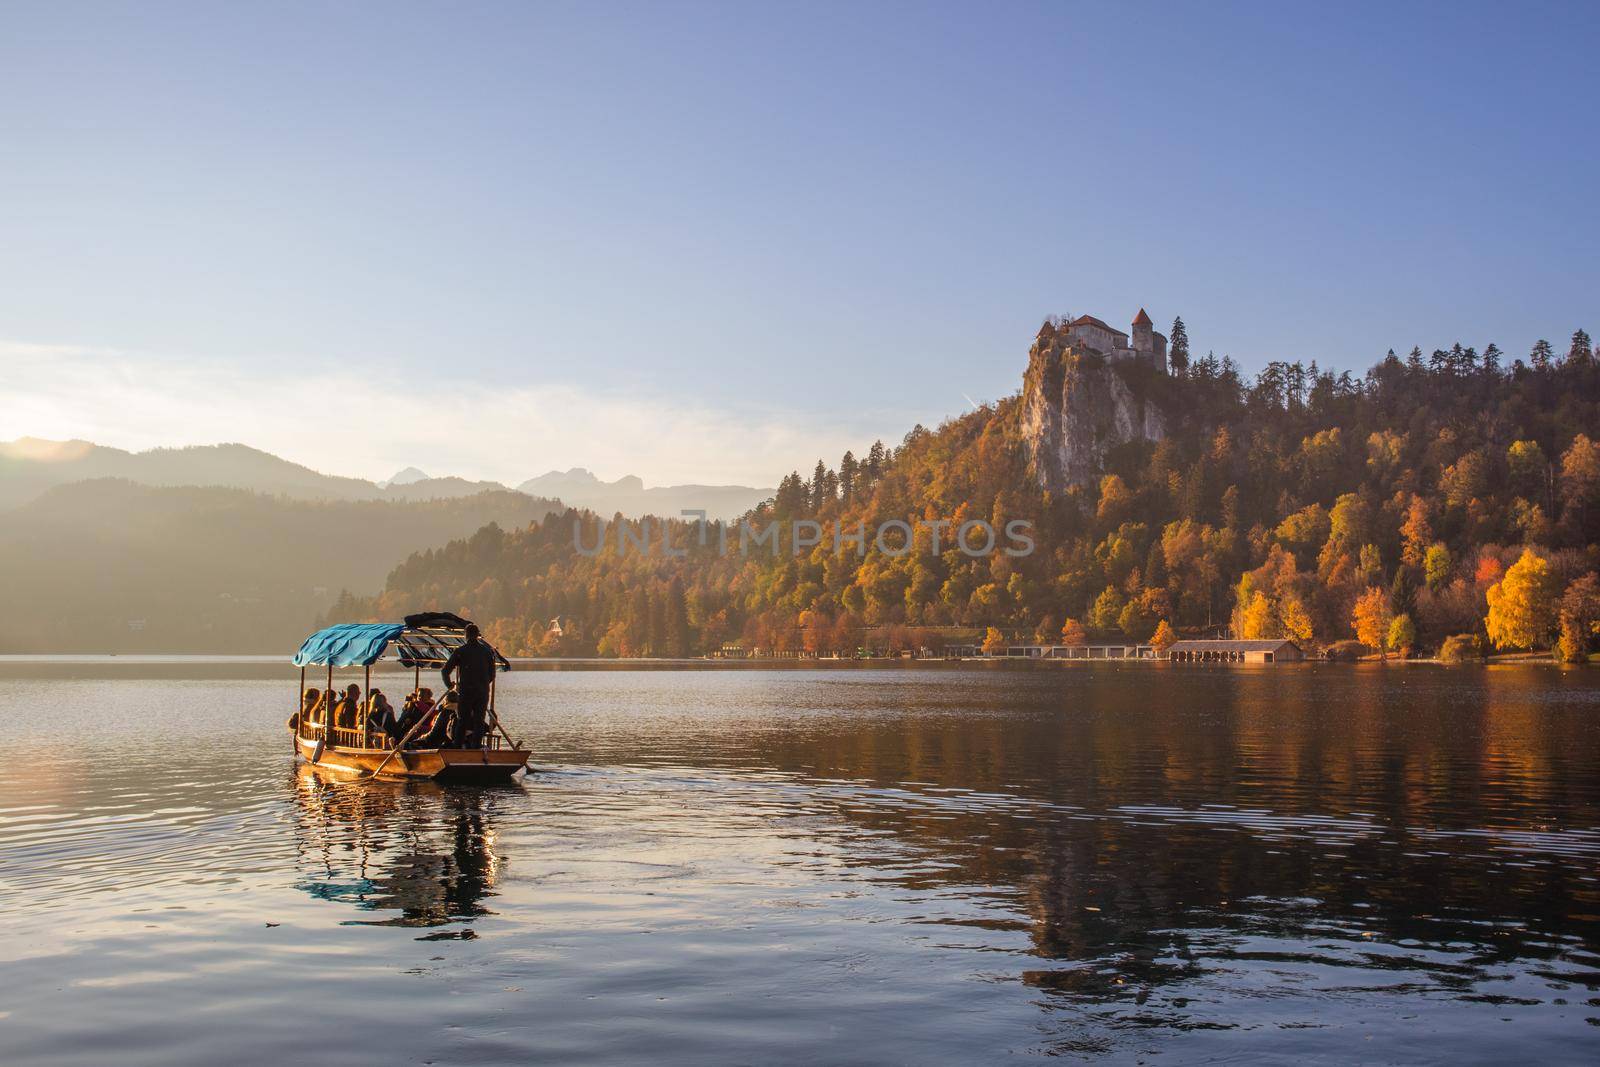 Traditional wooden boat on picture perfect picturesque lake Bled, Slovenia at sunset.